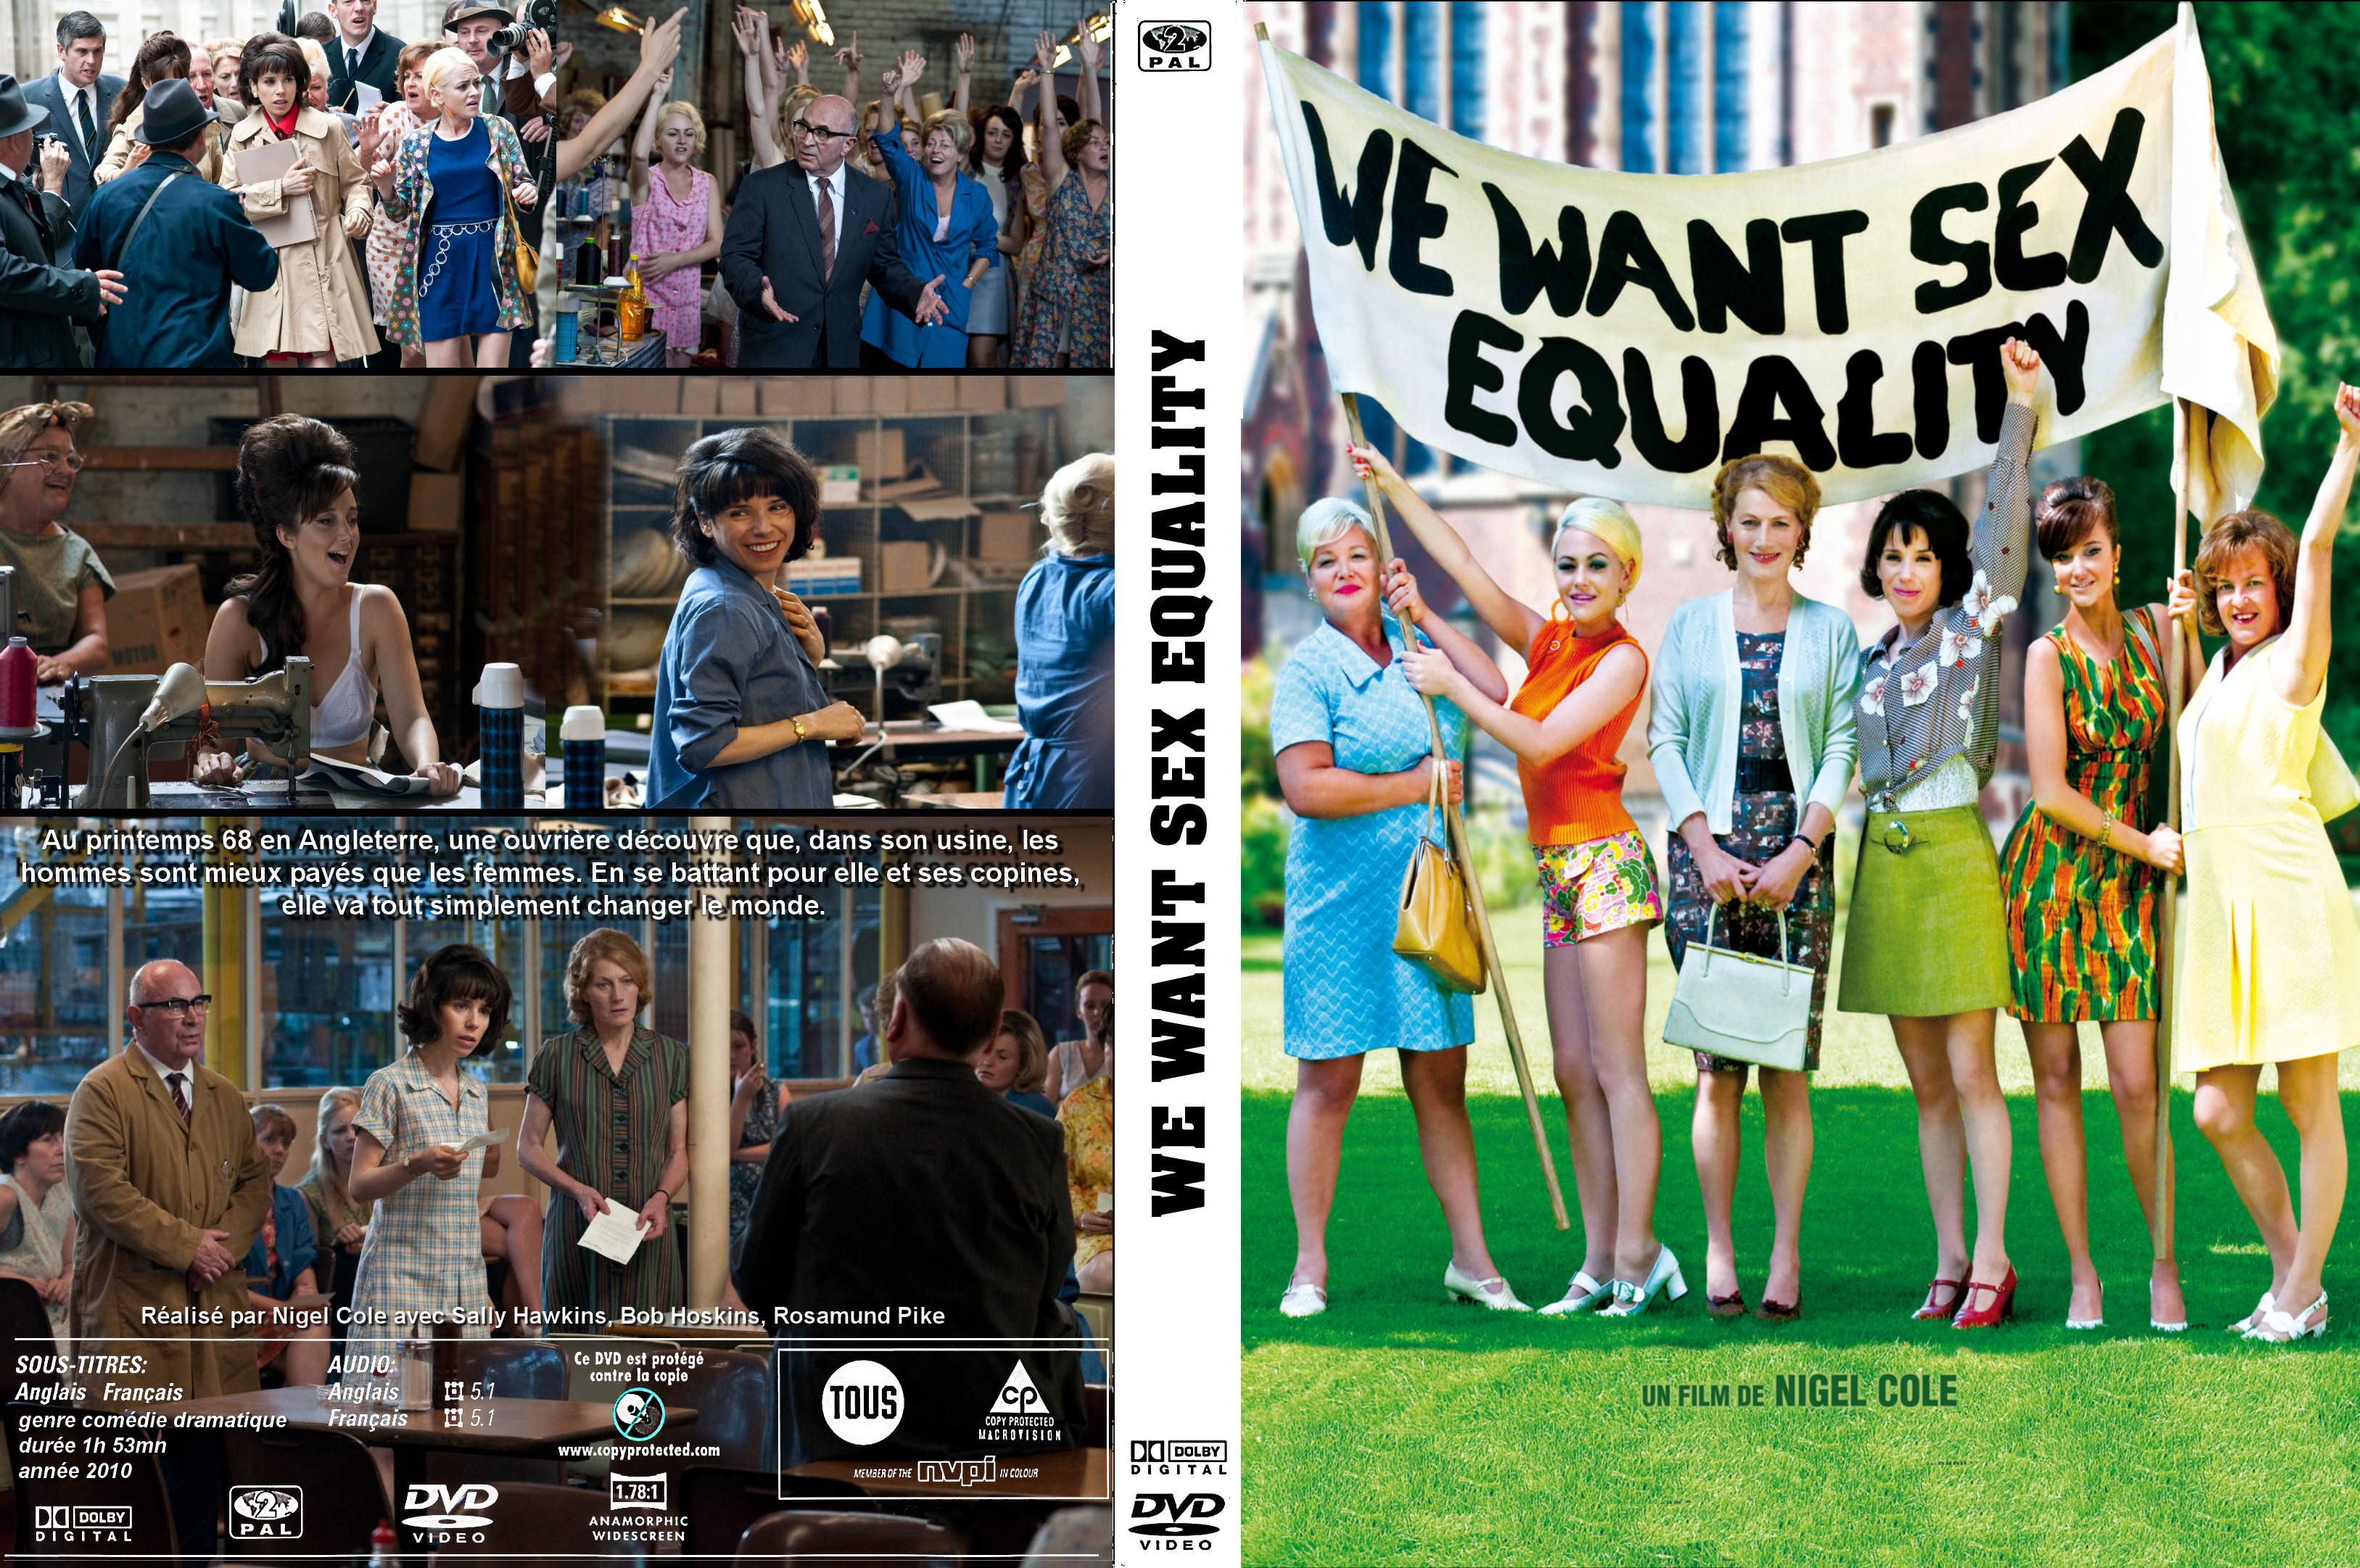 Jaquette DVD We want sex equality custom